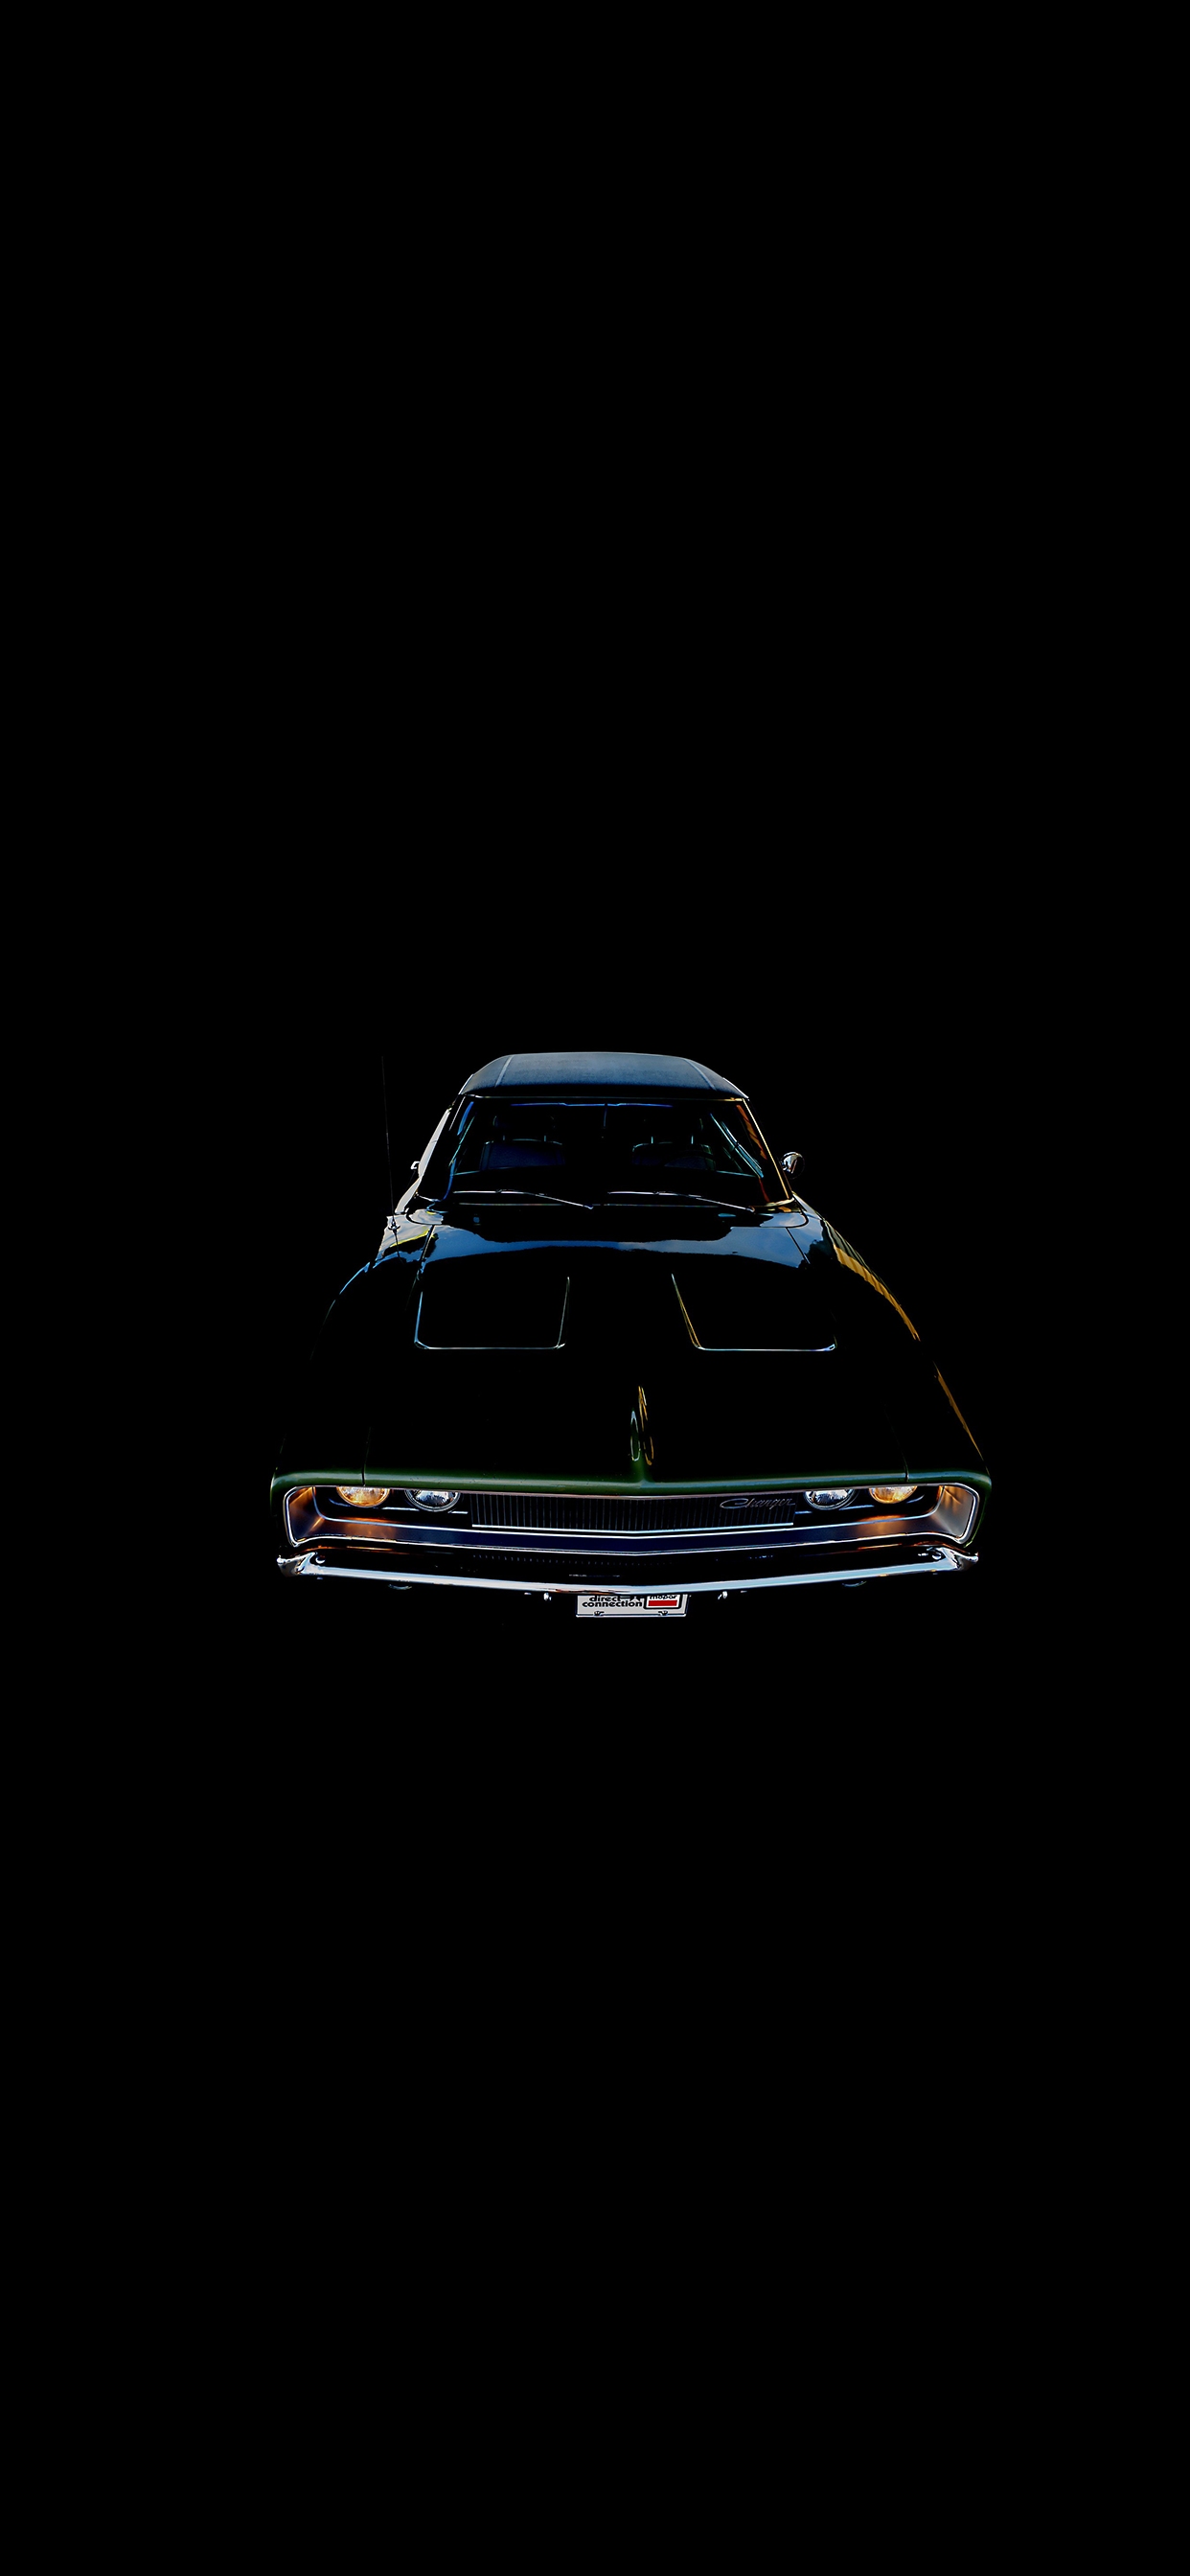 General 1242x2688 car Dodge Charger black background Dodge muscle cars American cars portrait display vehicle frontal view minimalism simple background